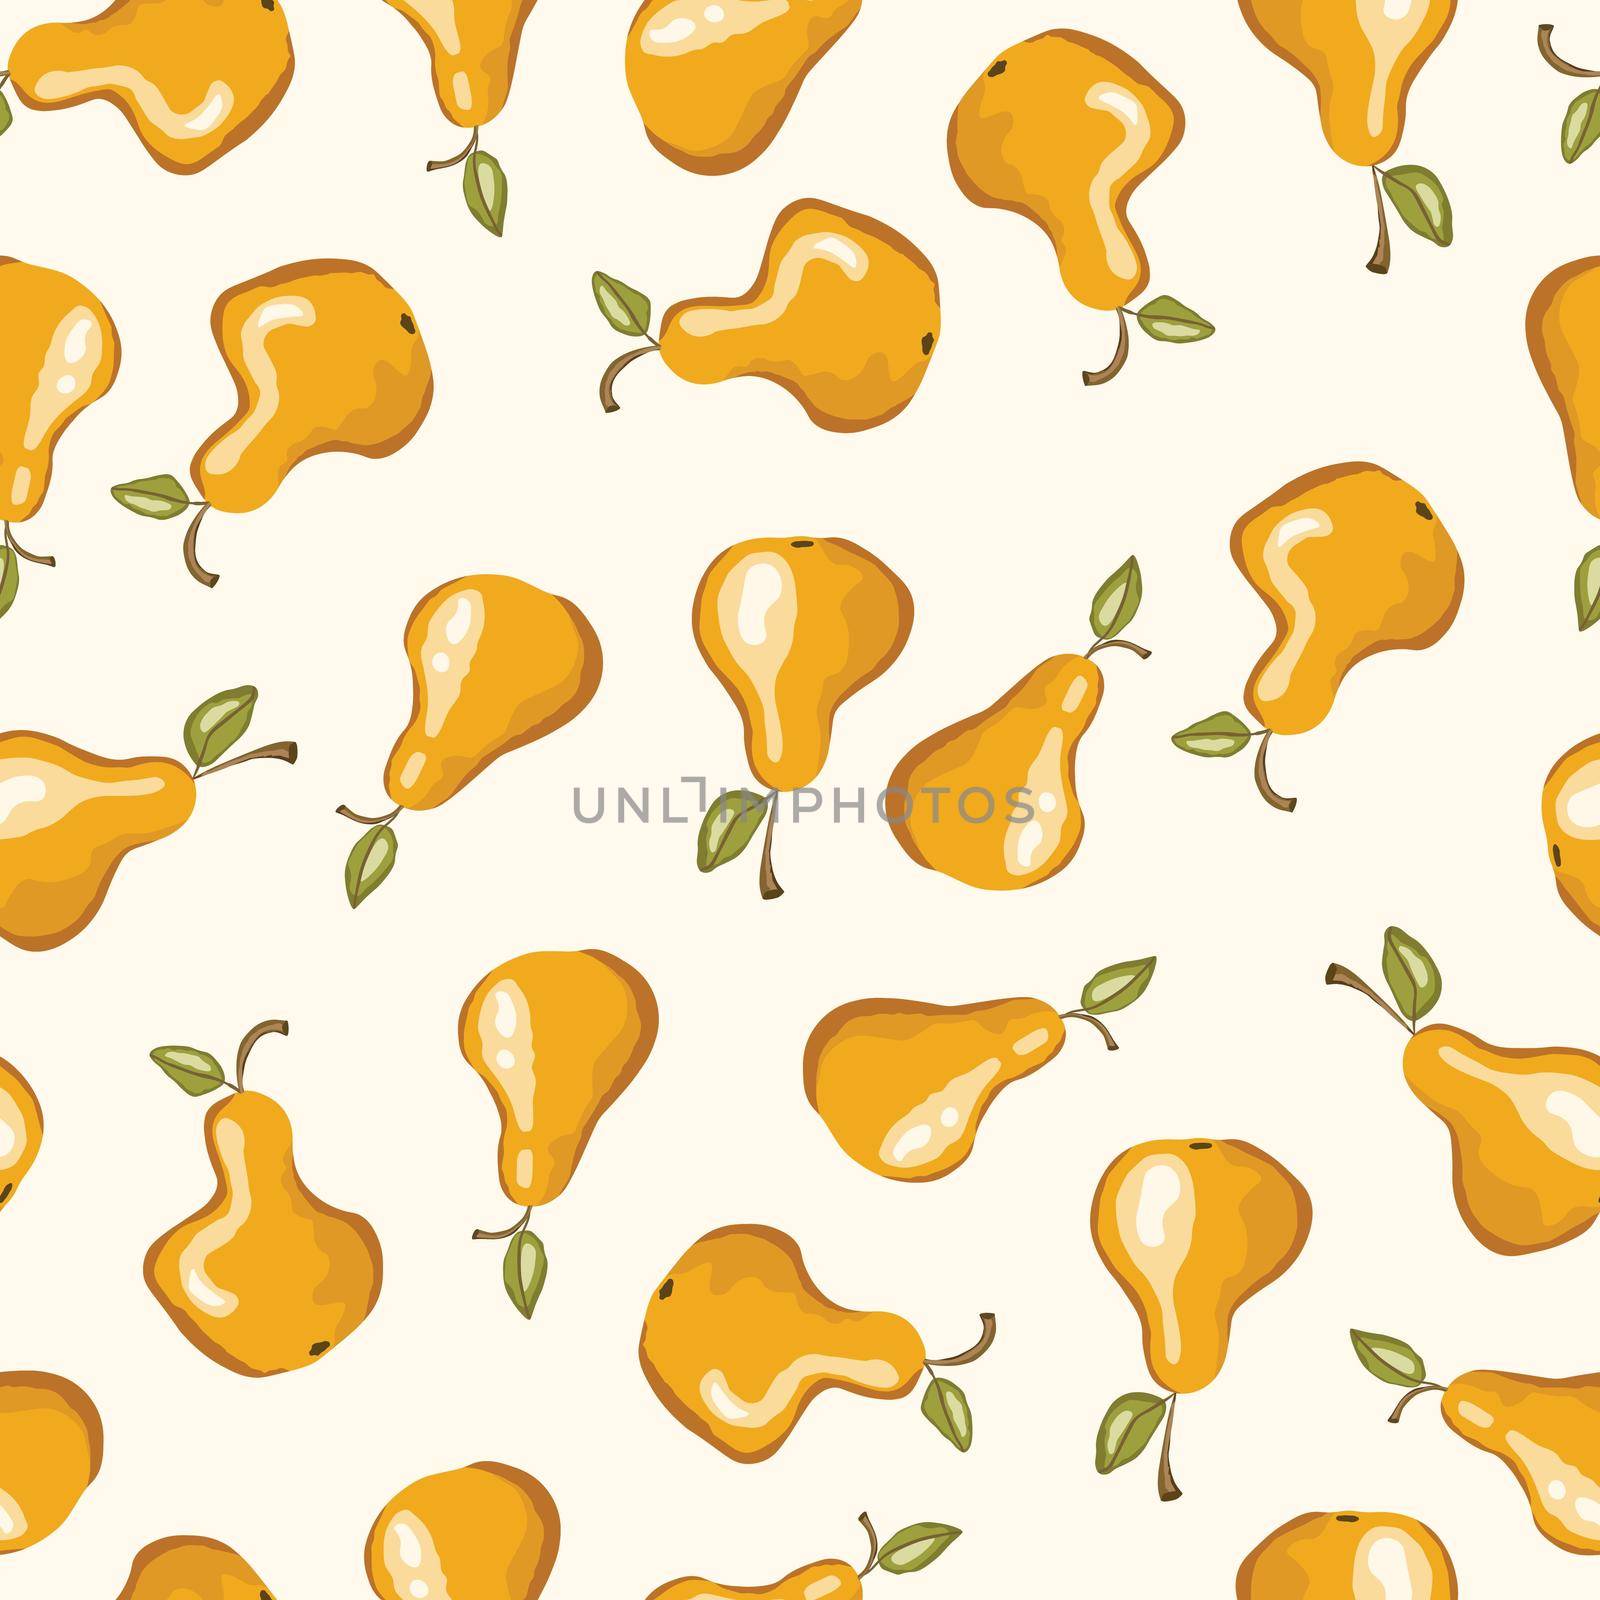 Seamless pattern with pear on white background. Natural delicious fresh ripe tasty fruit. Vector illustration for print, fabric, textile, banner, other design. Stylized pears with leaves. Food concept by allaku